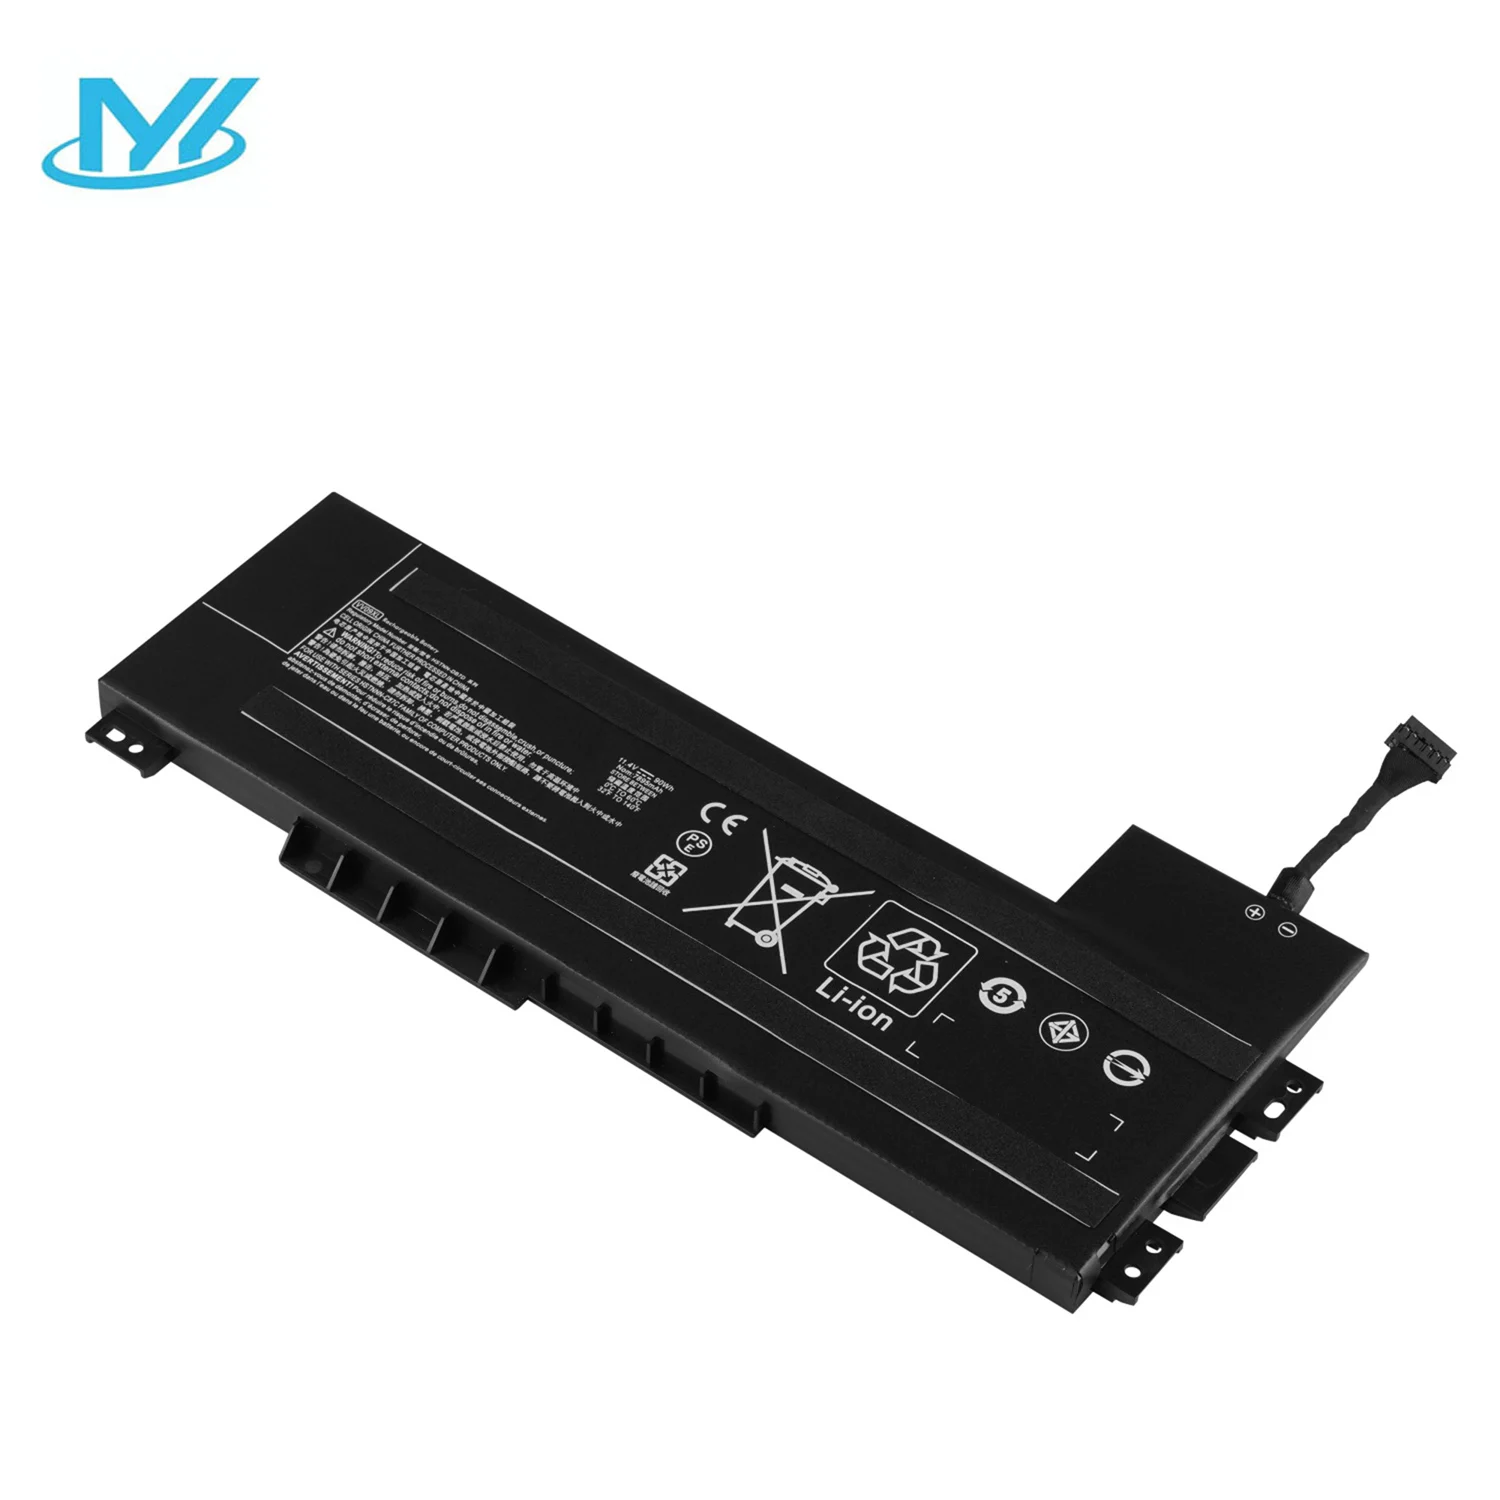 

VV09XL Laptop Battery Replacement for HP ZBook 15 G3 G4 17 G3 Mobile Workstation Series HSTNN-DB7D 808398-2C1 808452-001